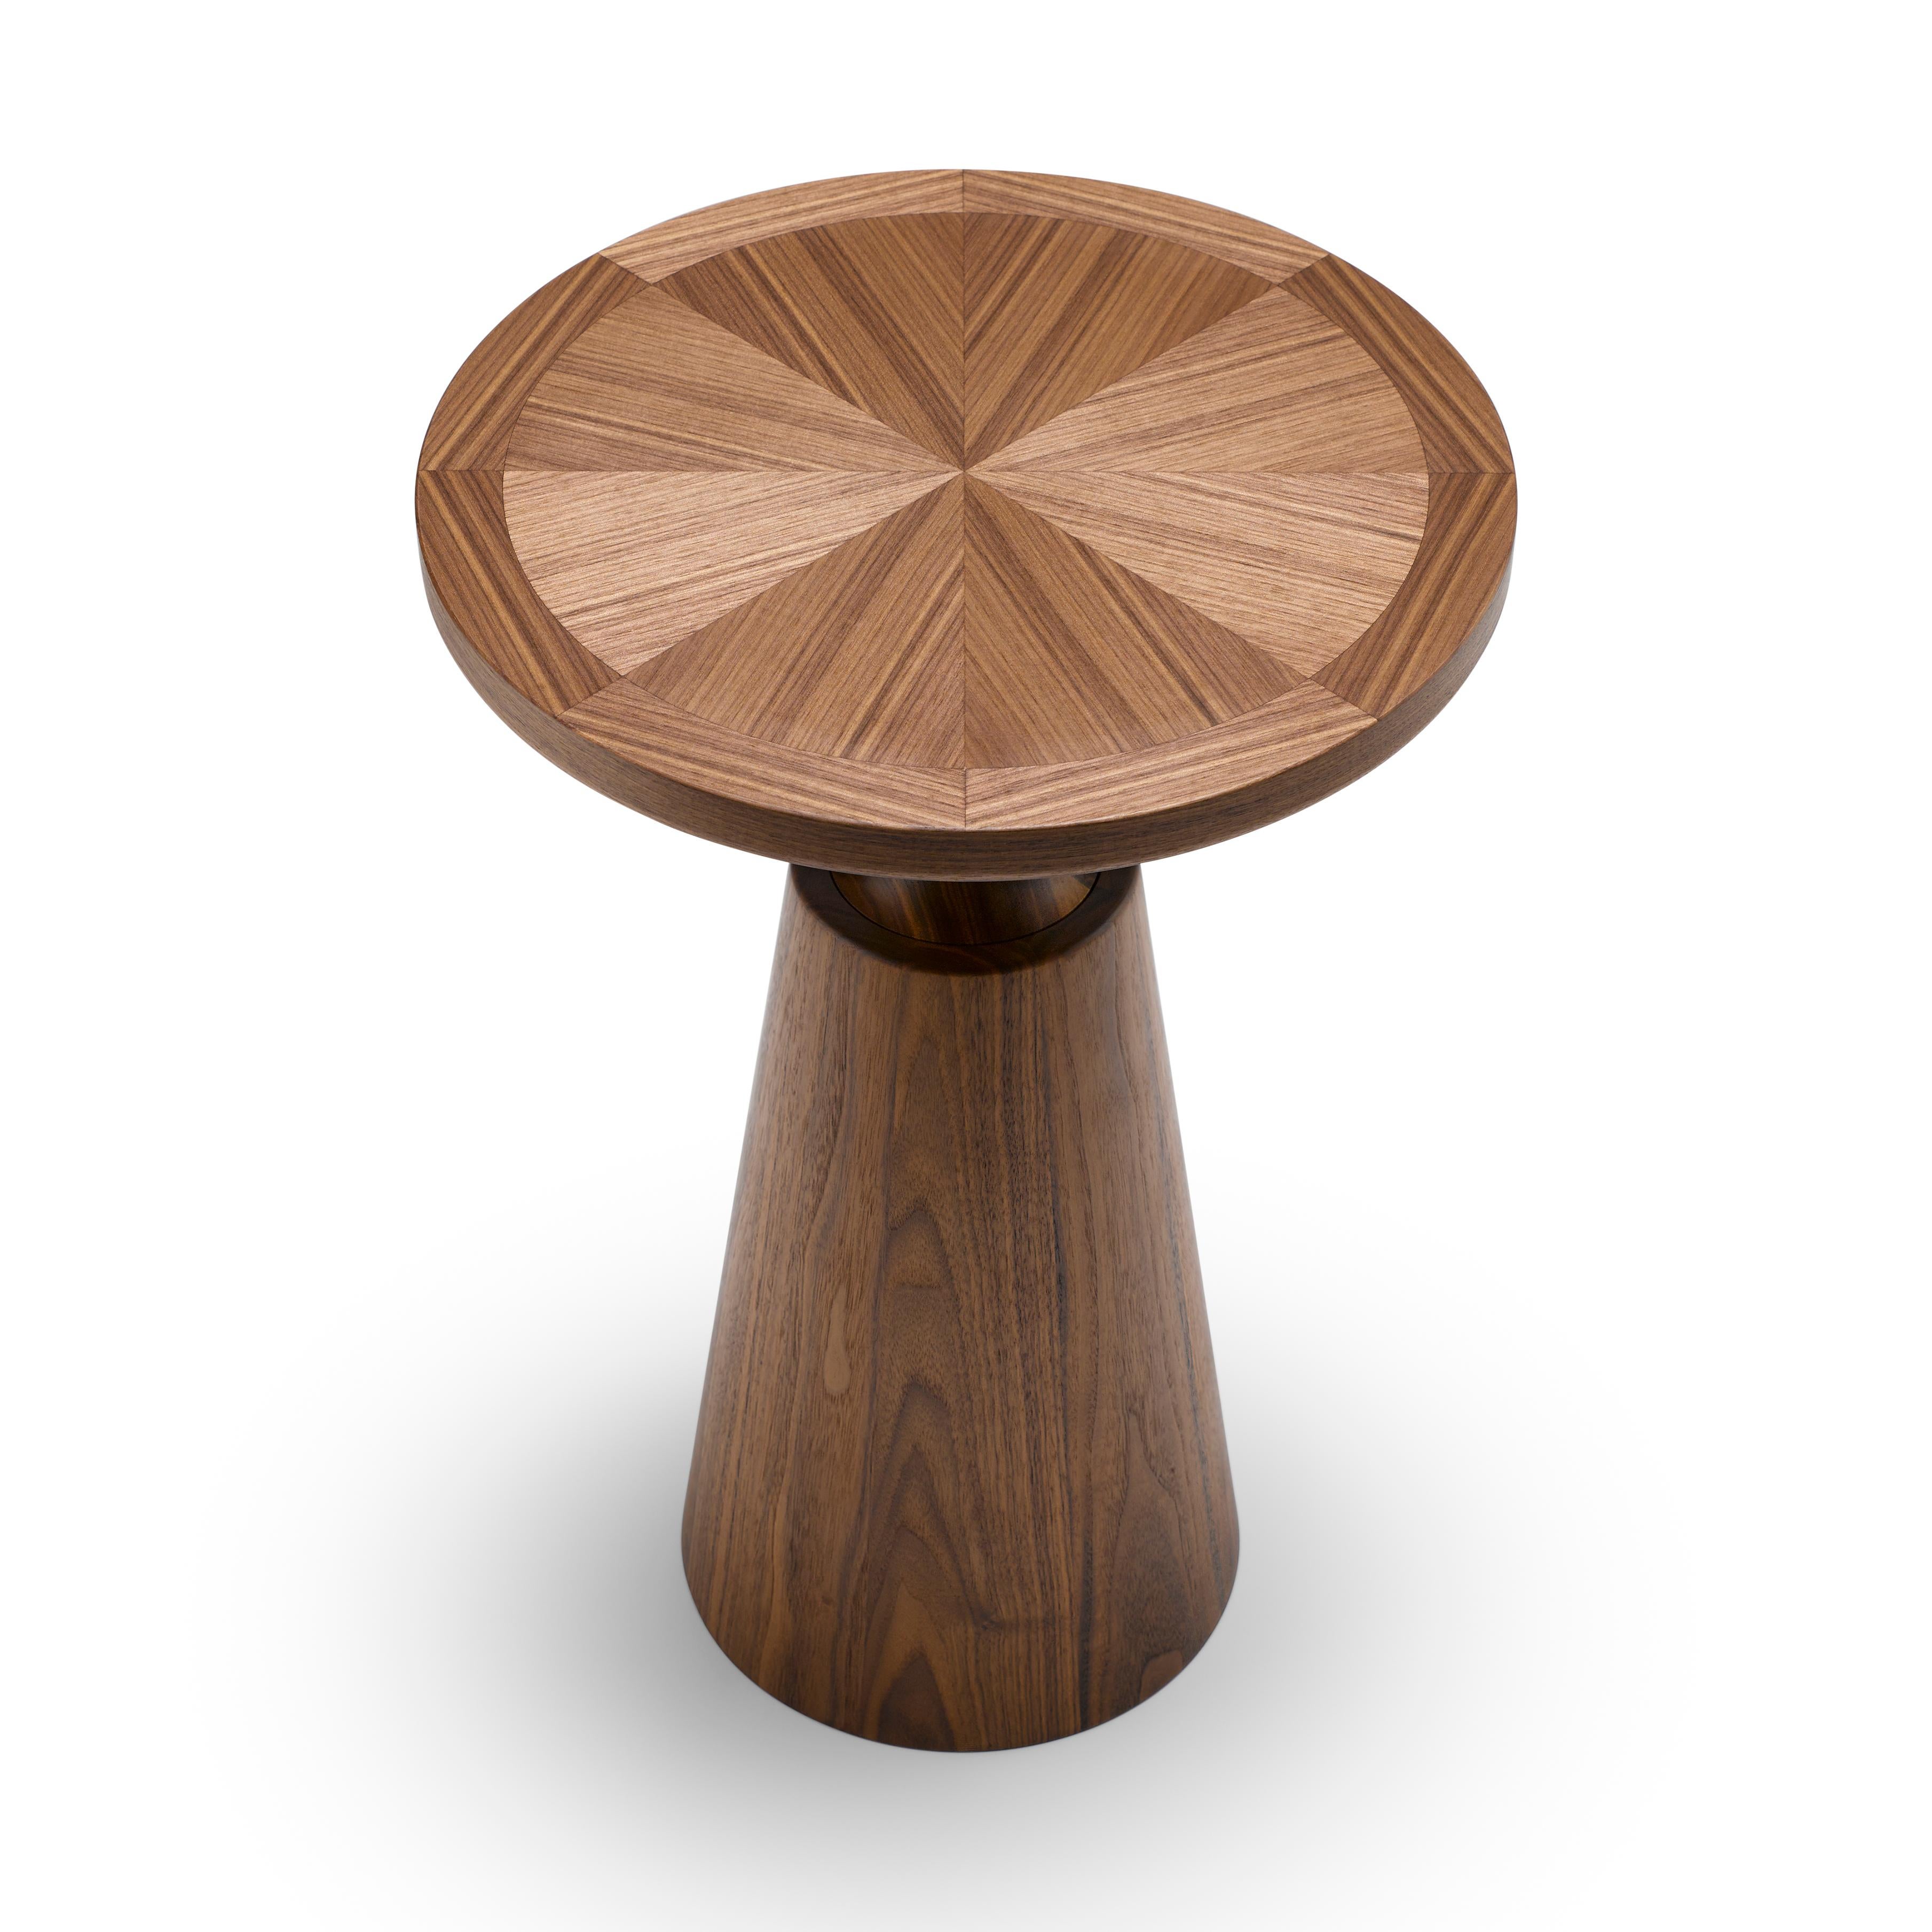 This special edition of one of our most celebrated pieces, the Nicole Side Table, is expertly lathe turned from thick sections of solid seasoned timber. It features a special radial cut veneered top with cross-branding. An elegant finishing piece to